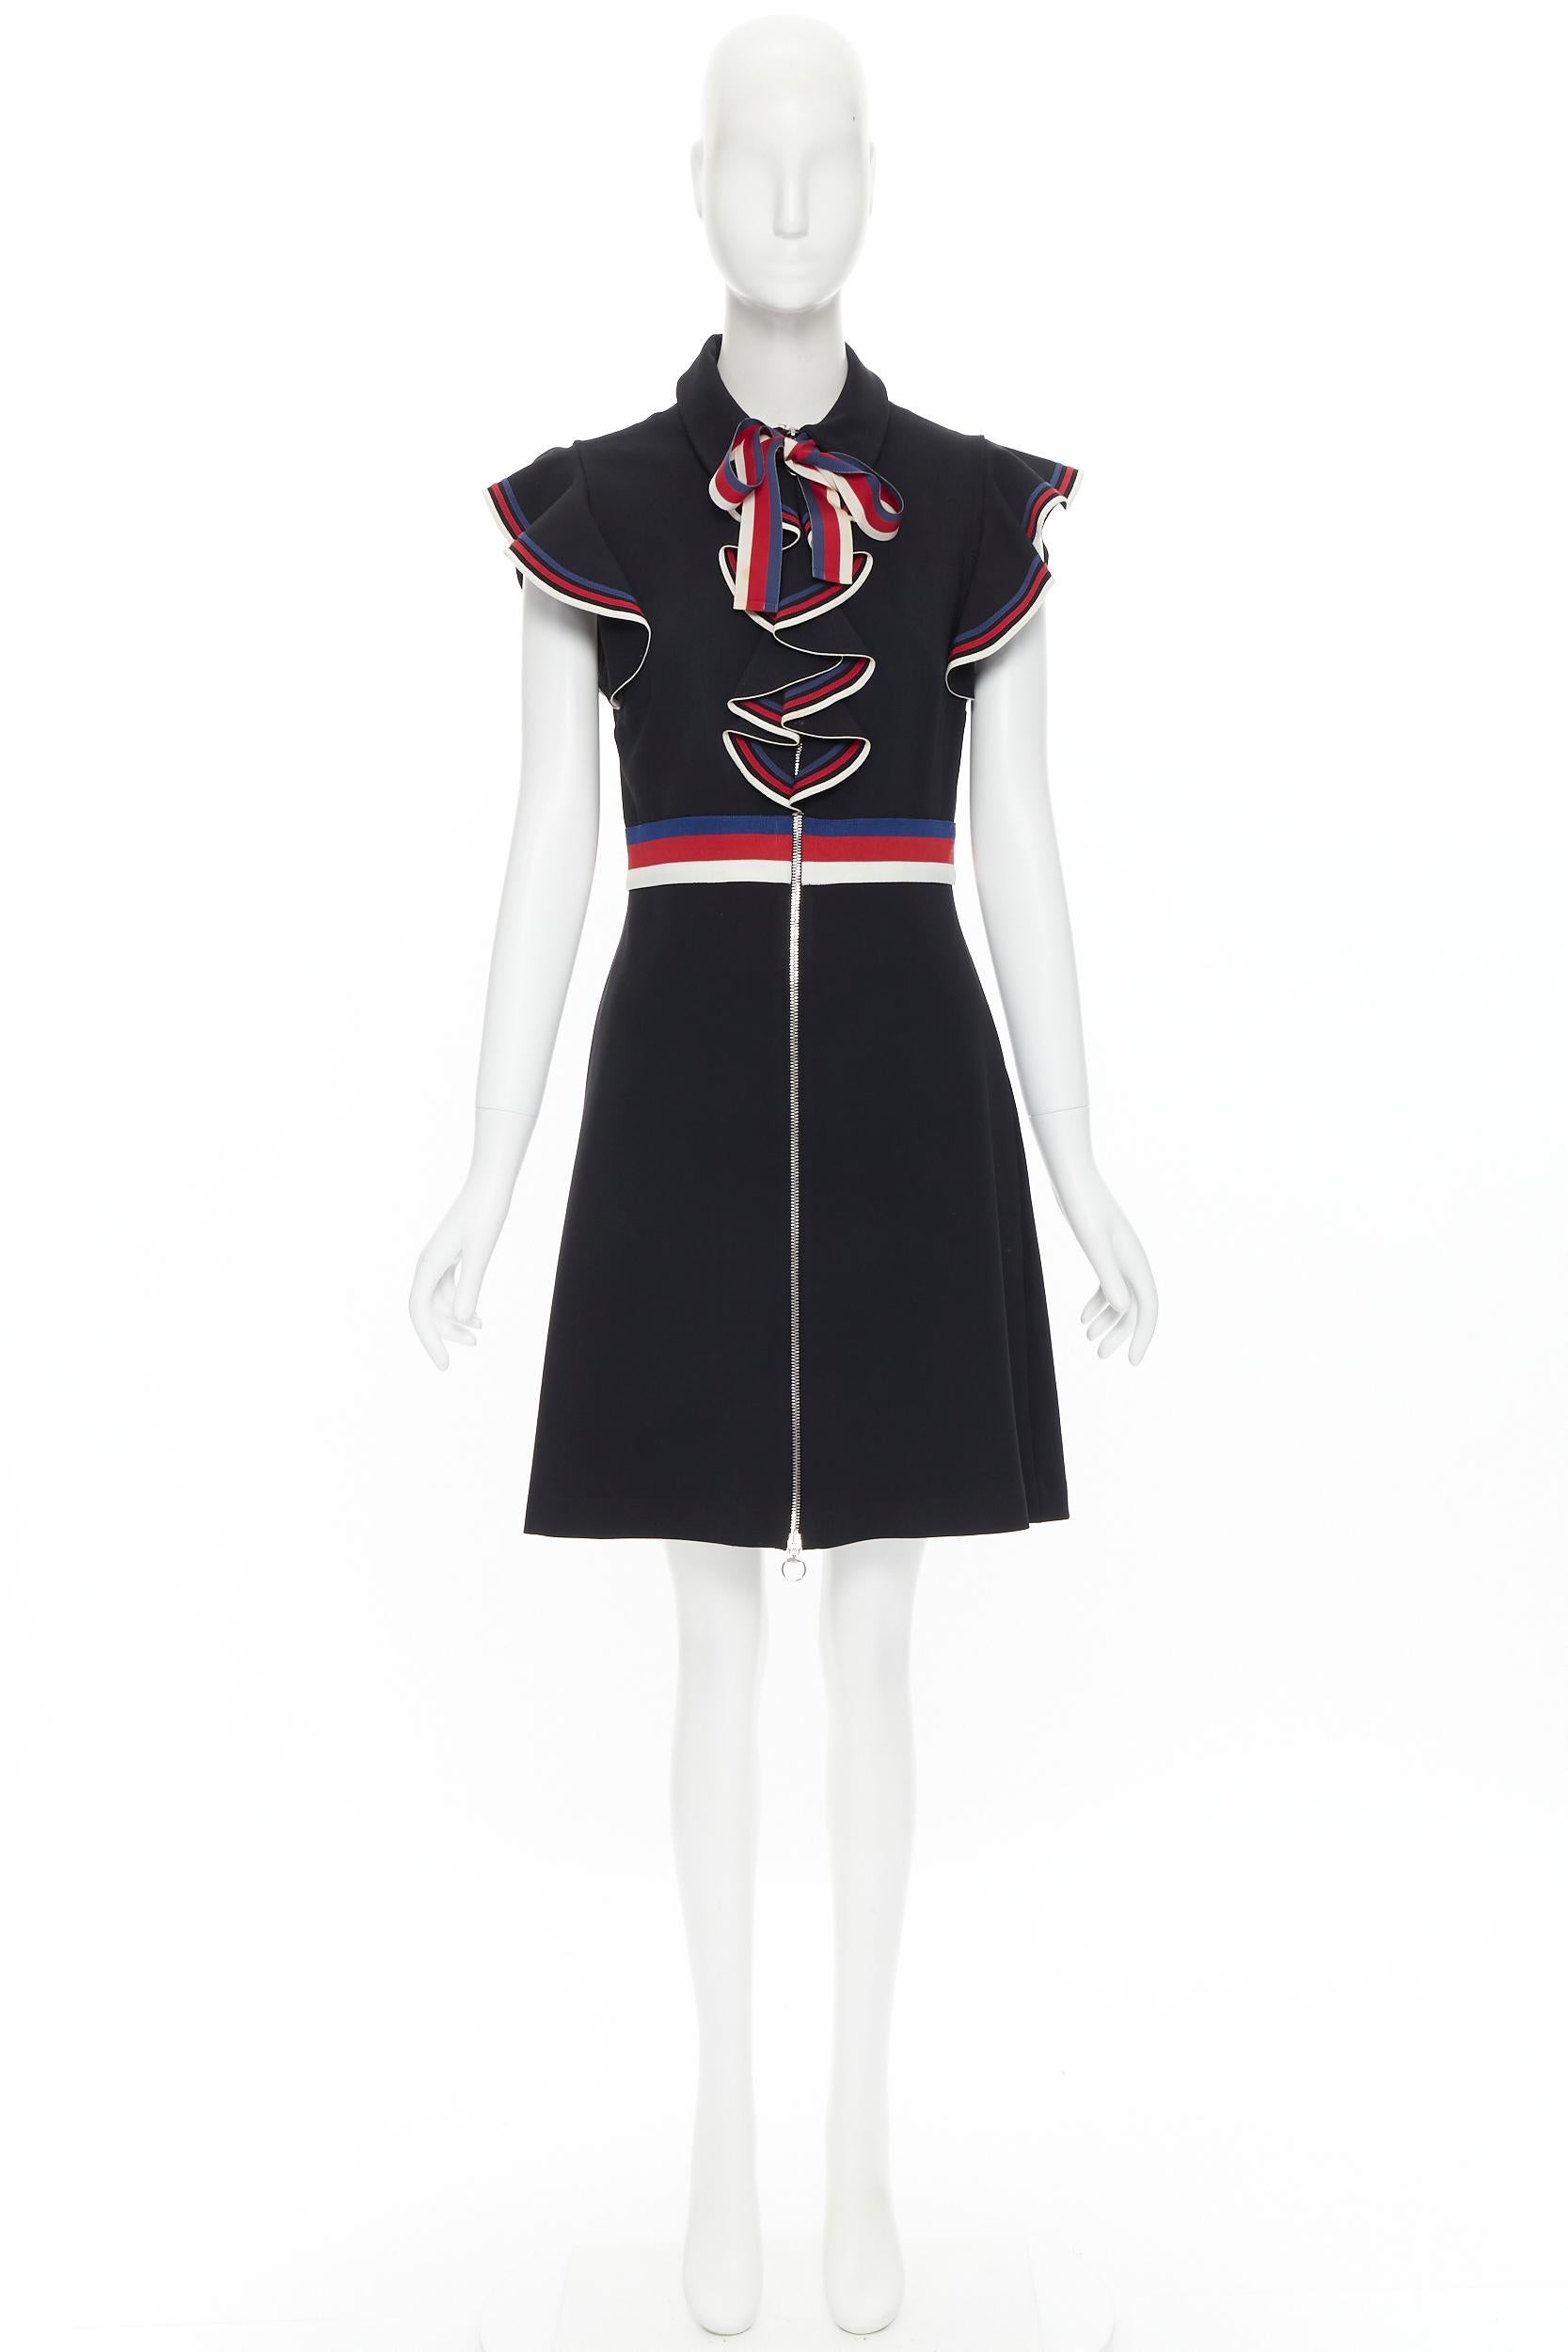 GUCCI black blue red white web ribbon bow flutter sleeve cocktail dress XL 2